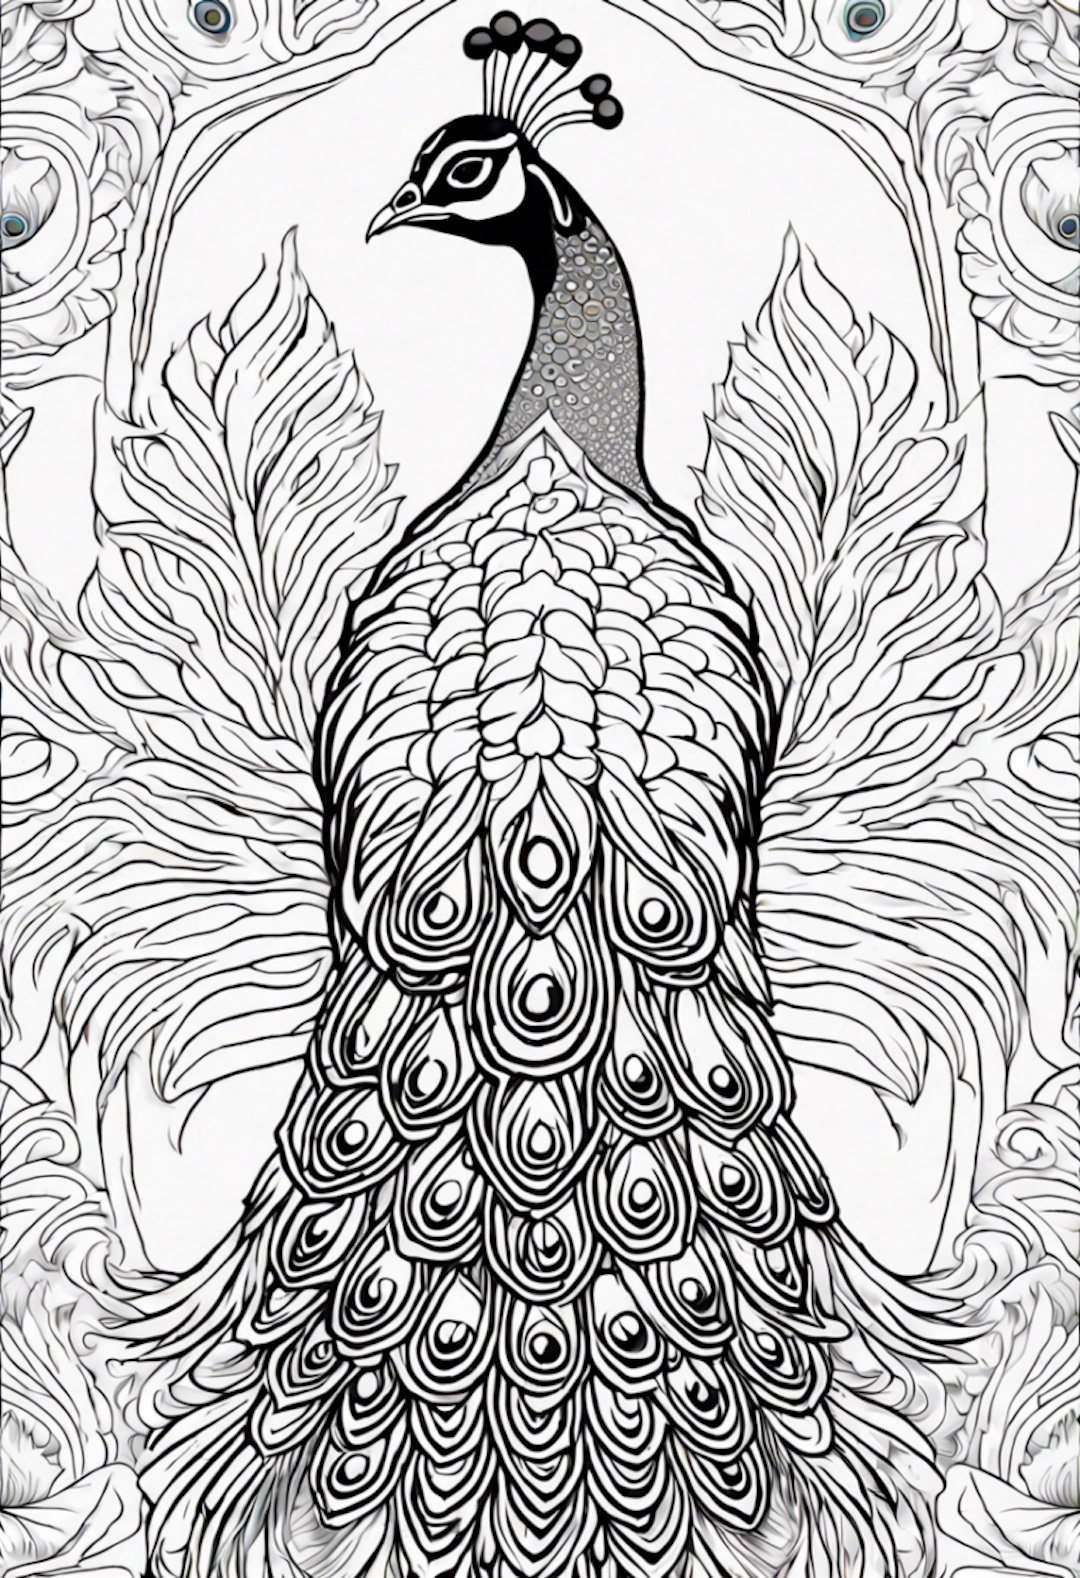 Majestic Peacock’s Feathers Coloring Page coloring pages